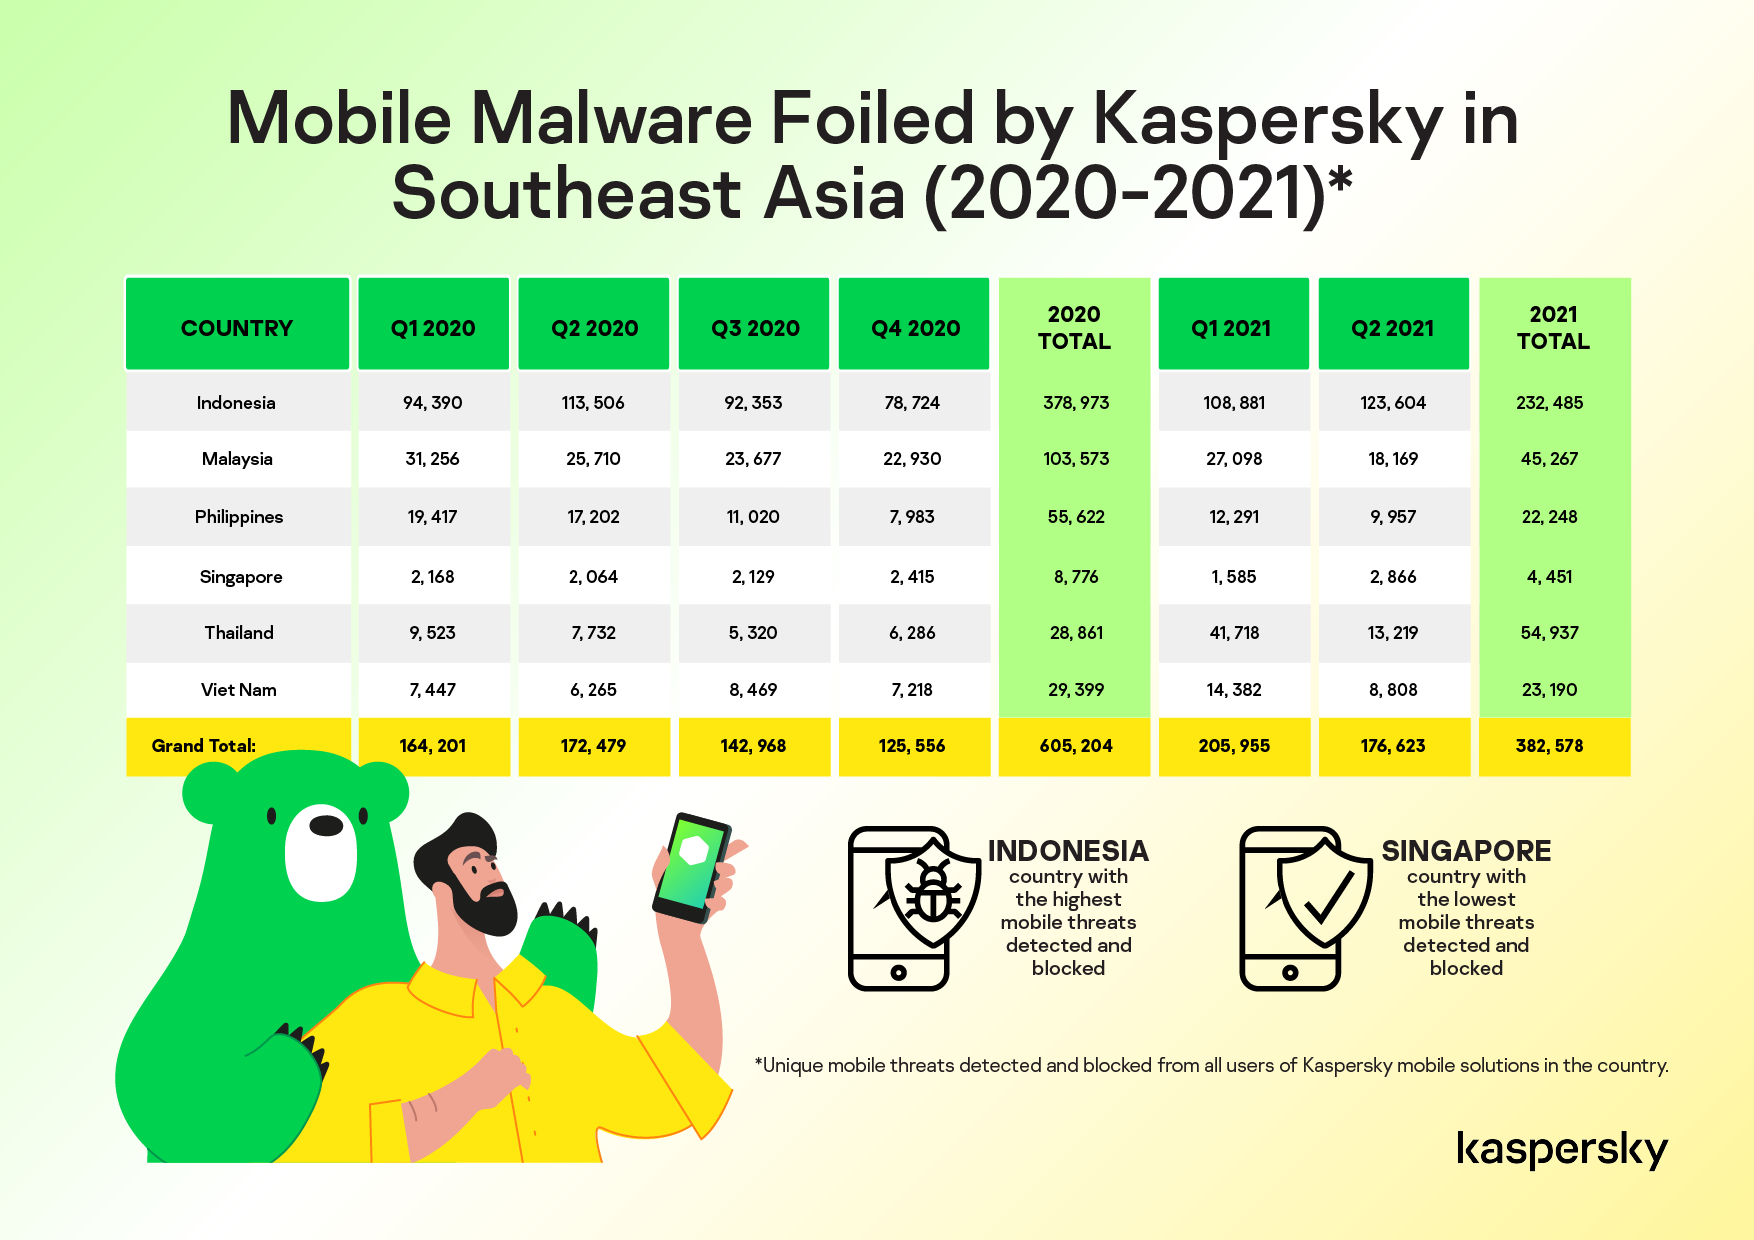 C:\Users\gonzales_r\AppData\Local\Microsoft\Windows\INetCache\Content.Word\Mobile Malware Foiled by Kaspersky in Southeast Asia_Landscape_v2-01.png